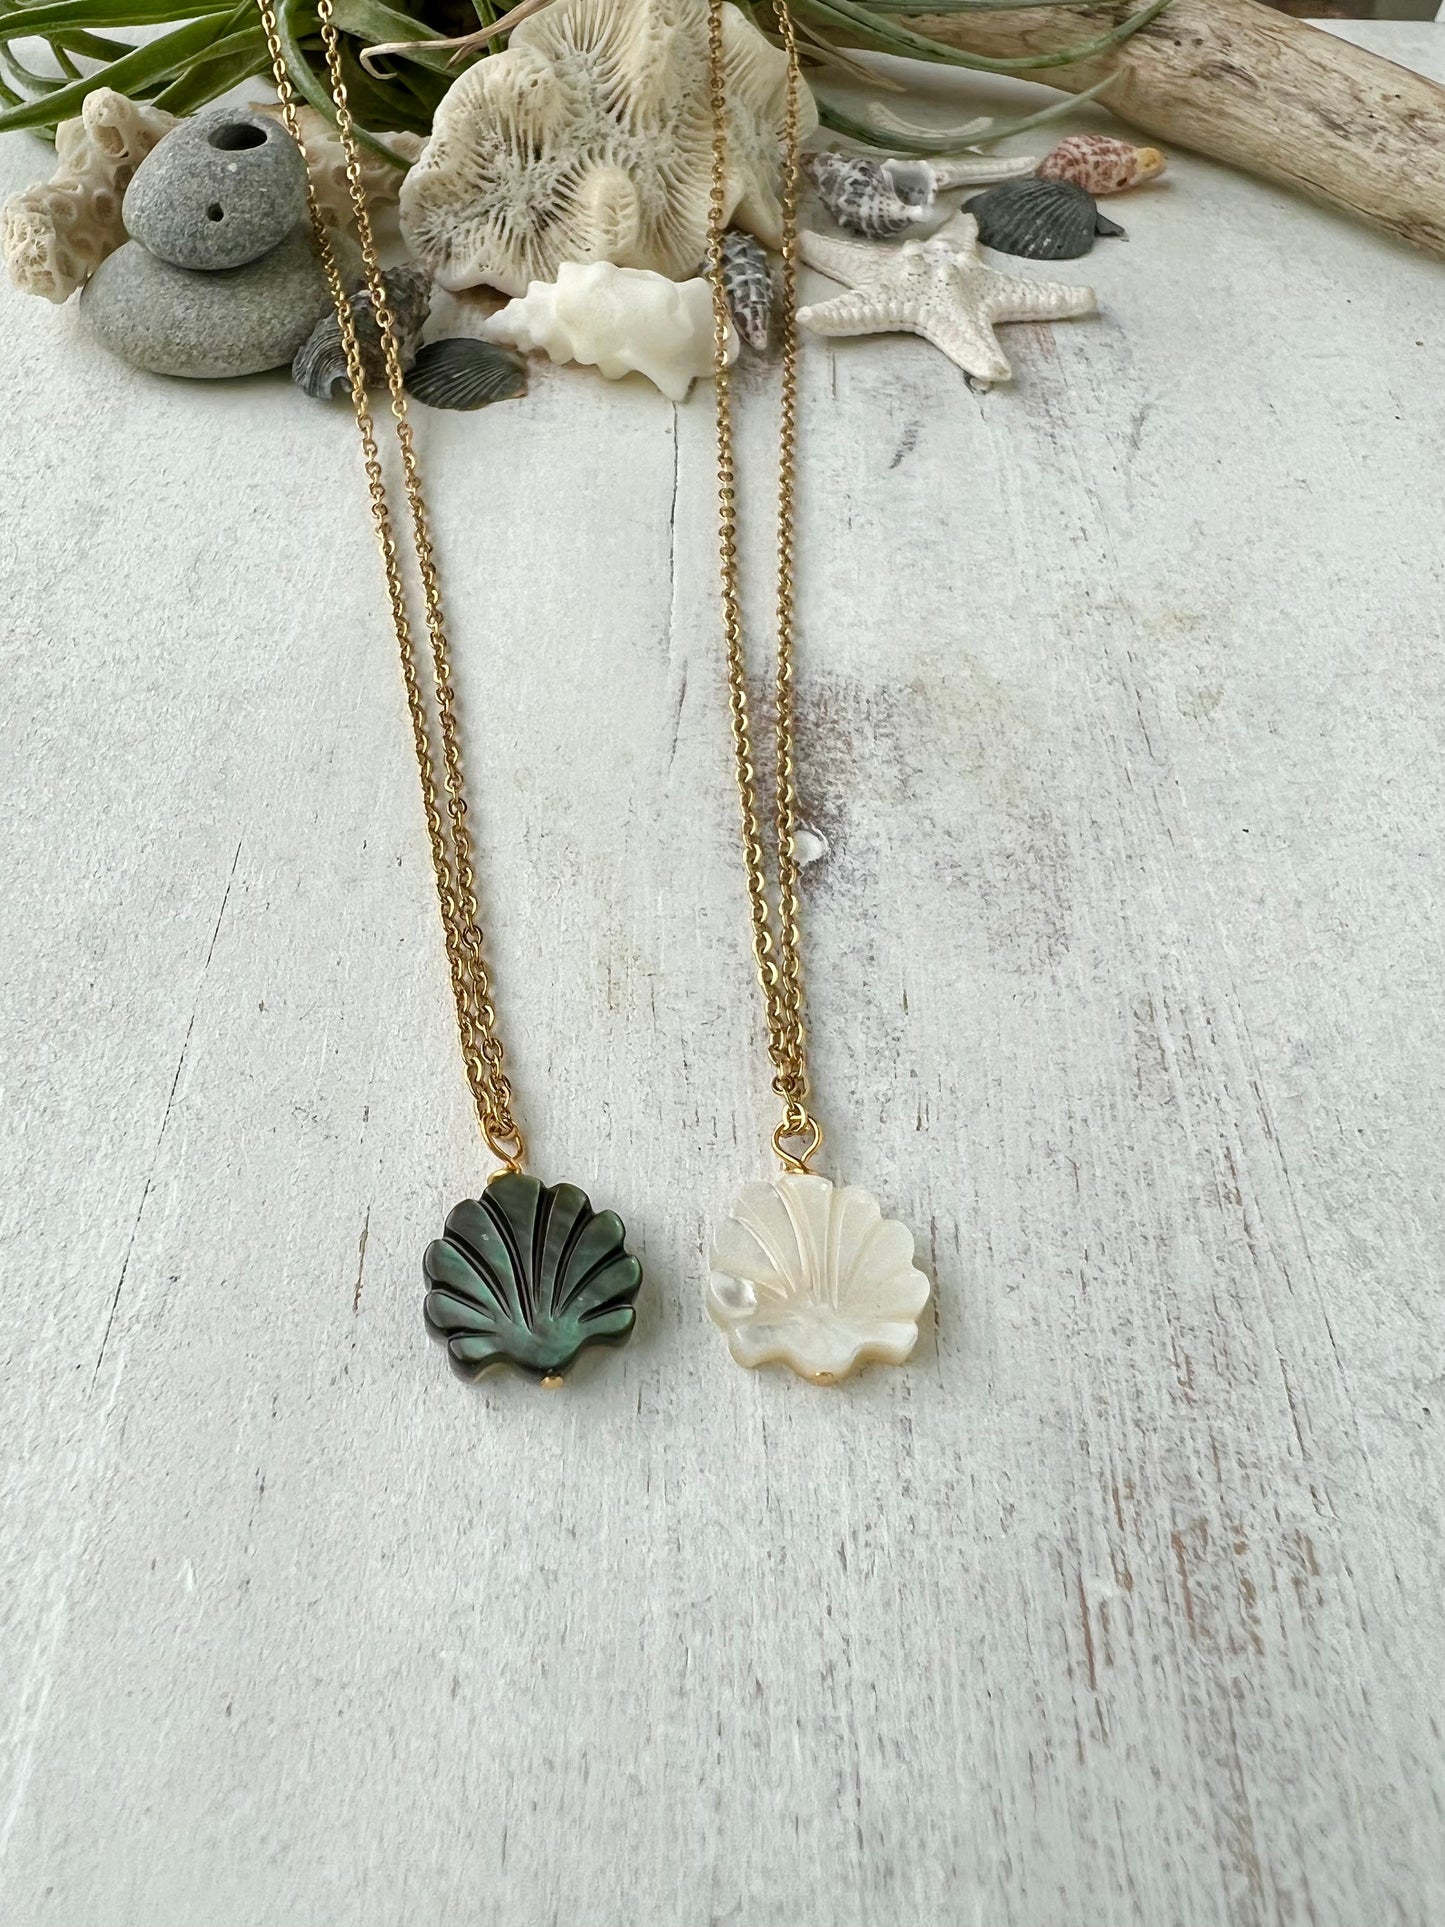 two necklaces laying on a white background with shells and coral in the background. the necklaces feature scallop shell charms in mother of pearl and black lip shell